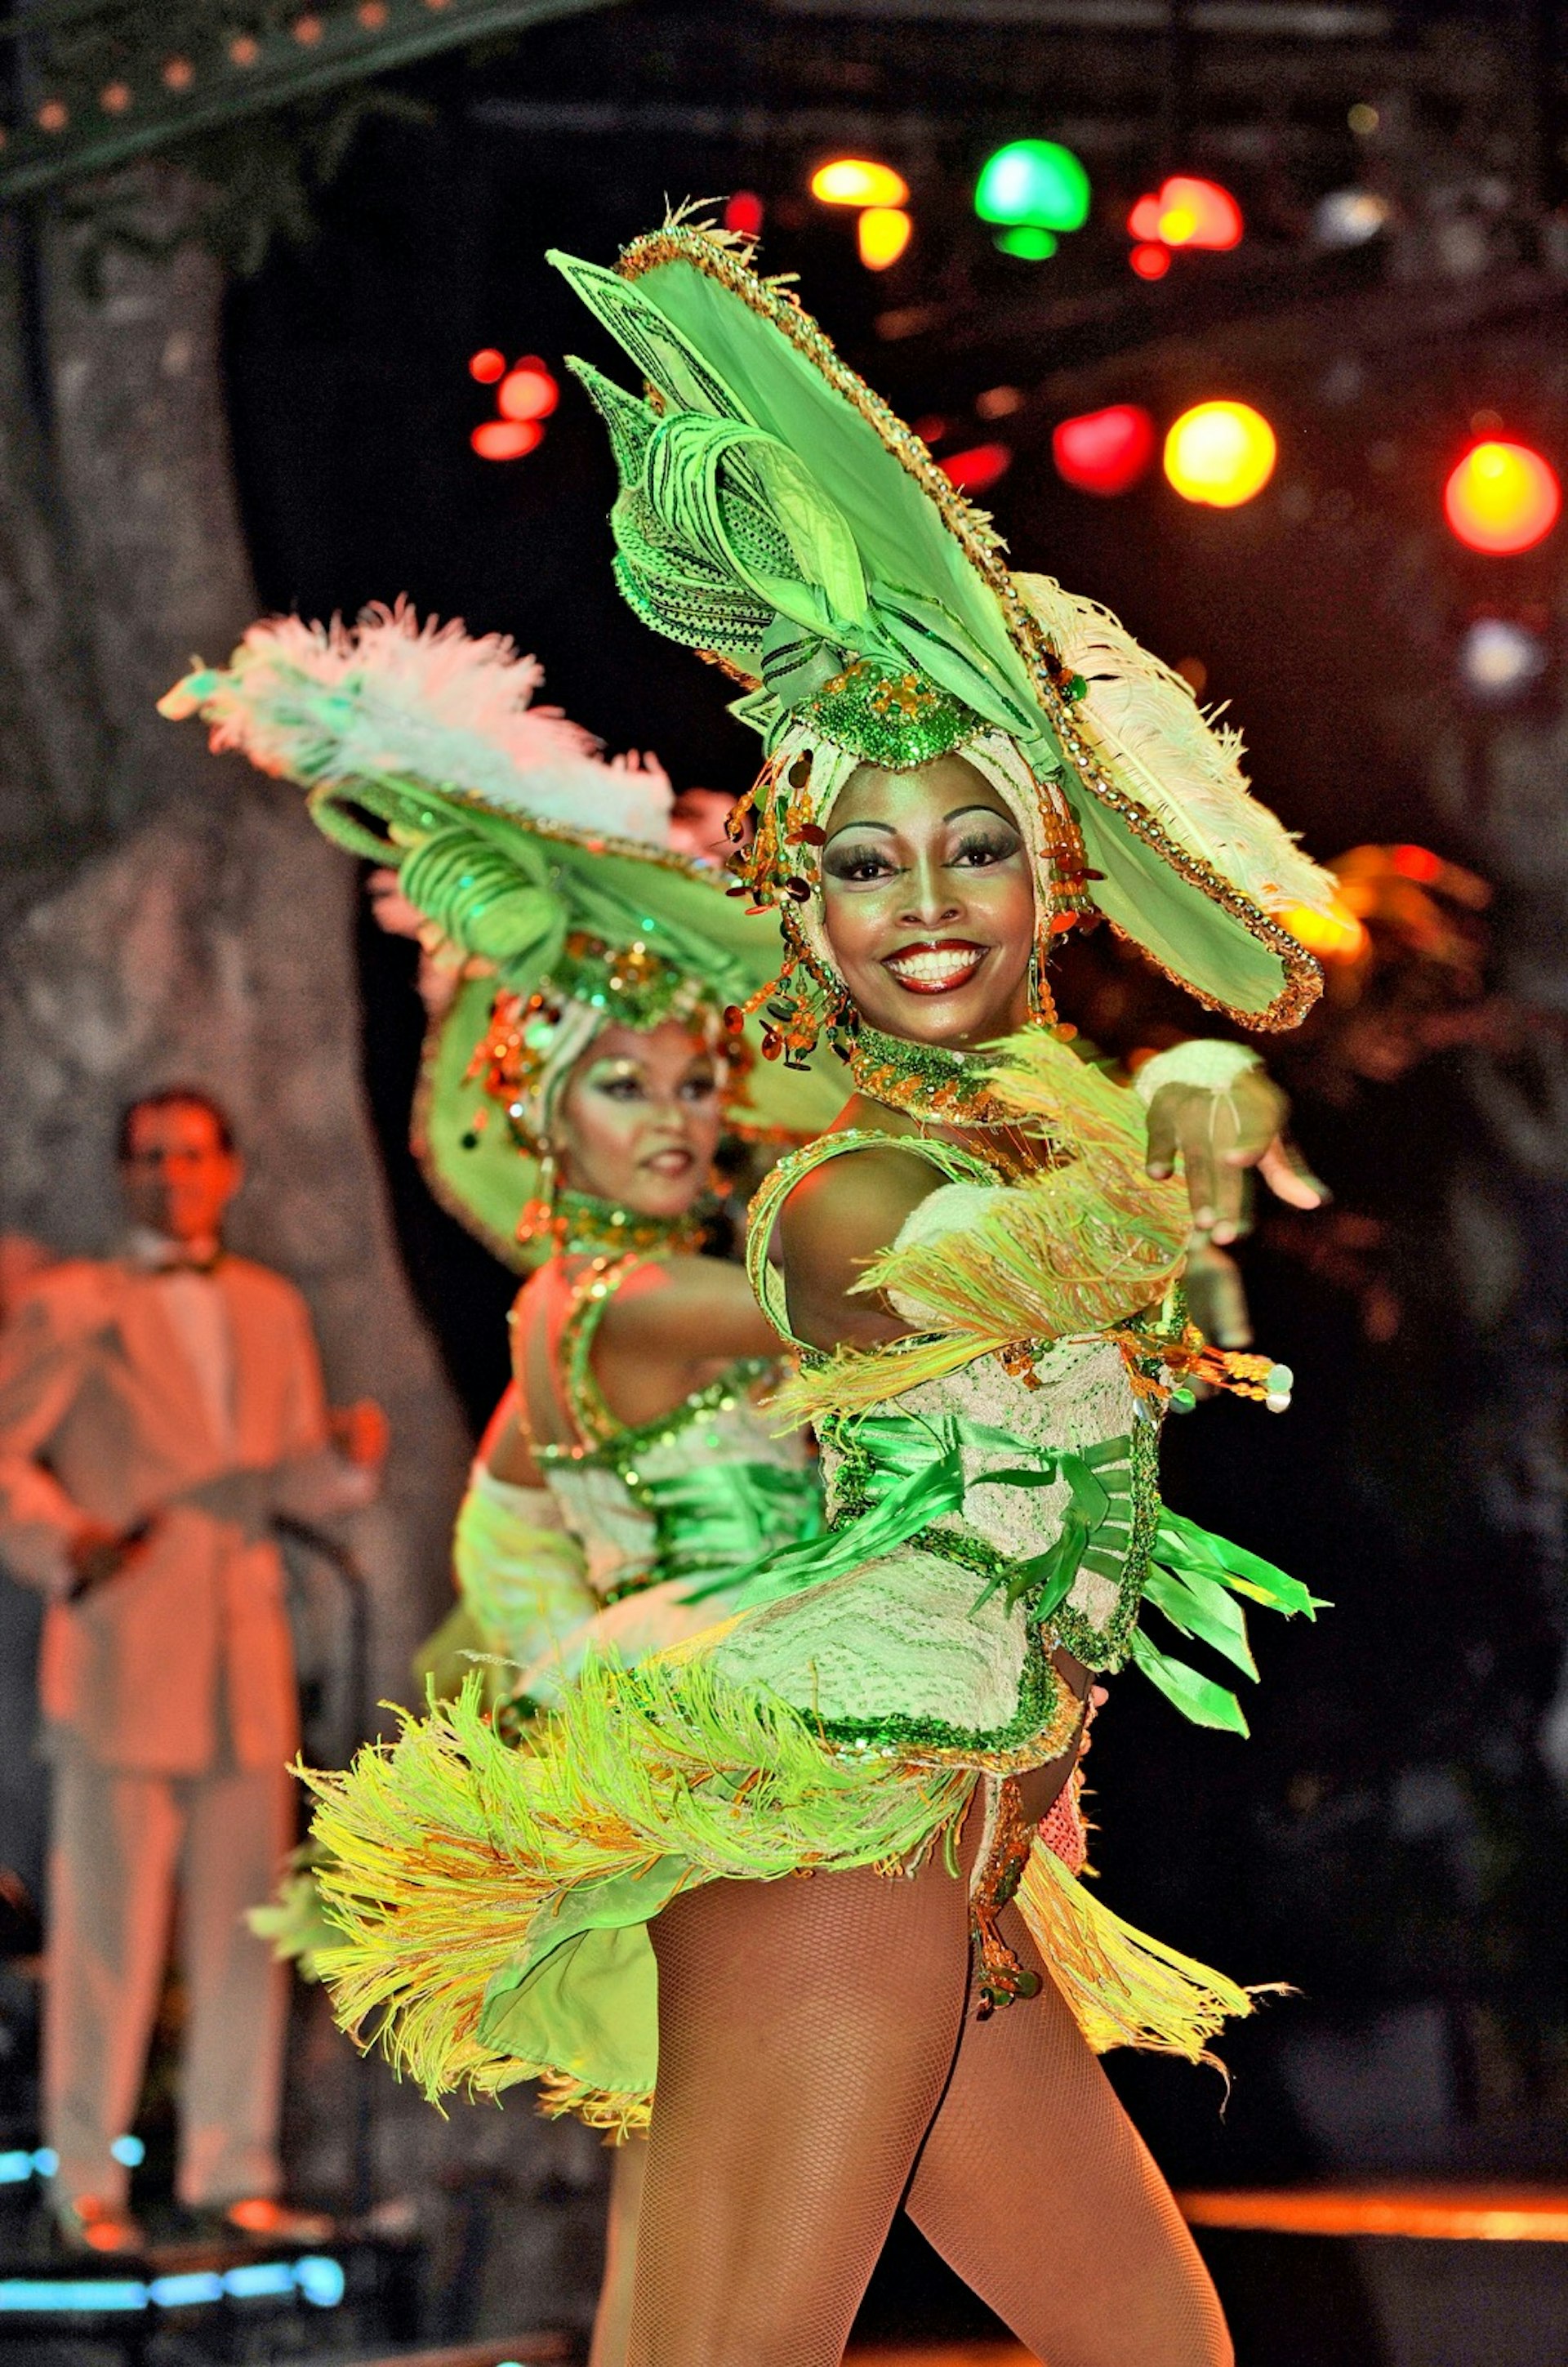 A pair of performers dance during a show at the Cabaret Tropicana  © The Visual Explorer/ Shutterstock